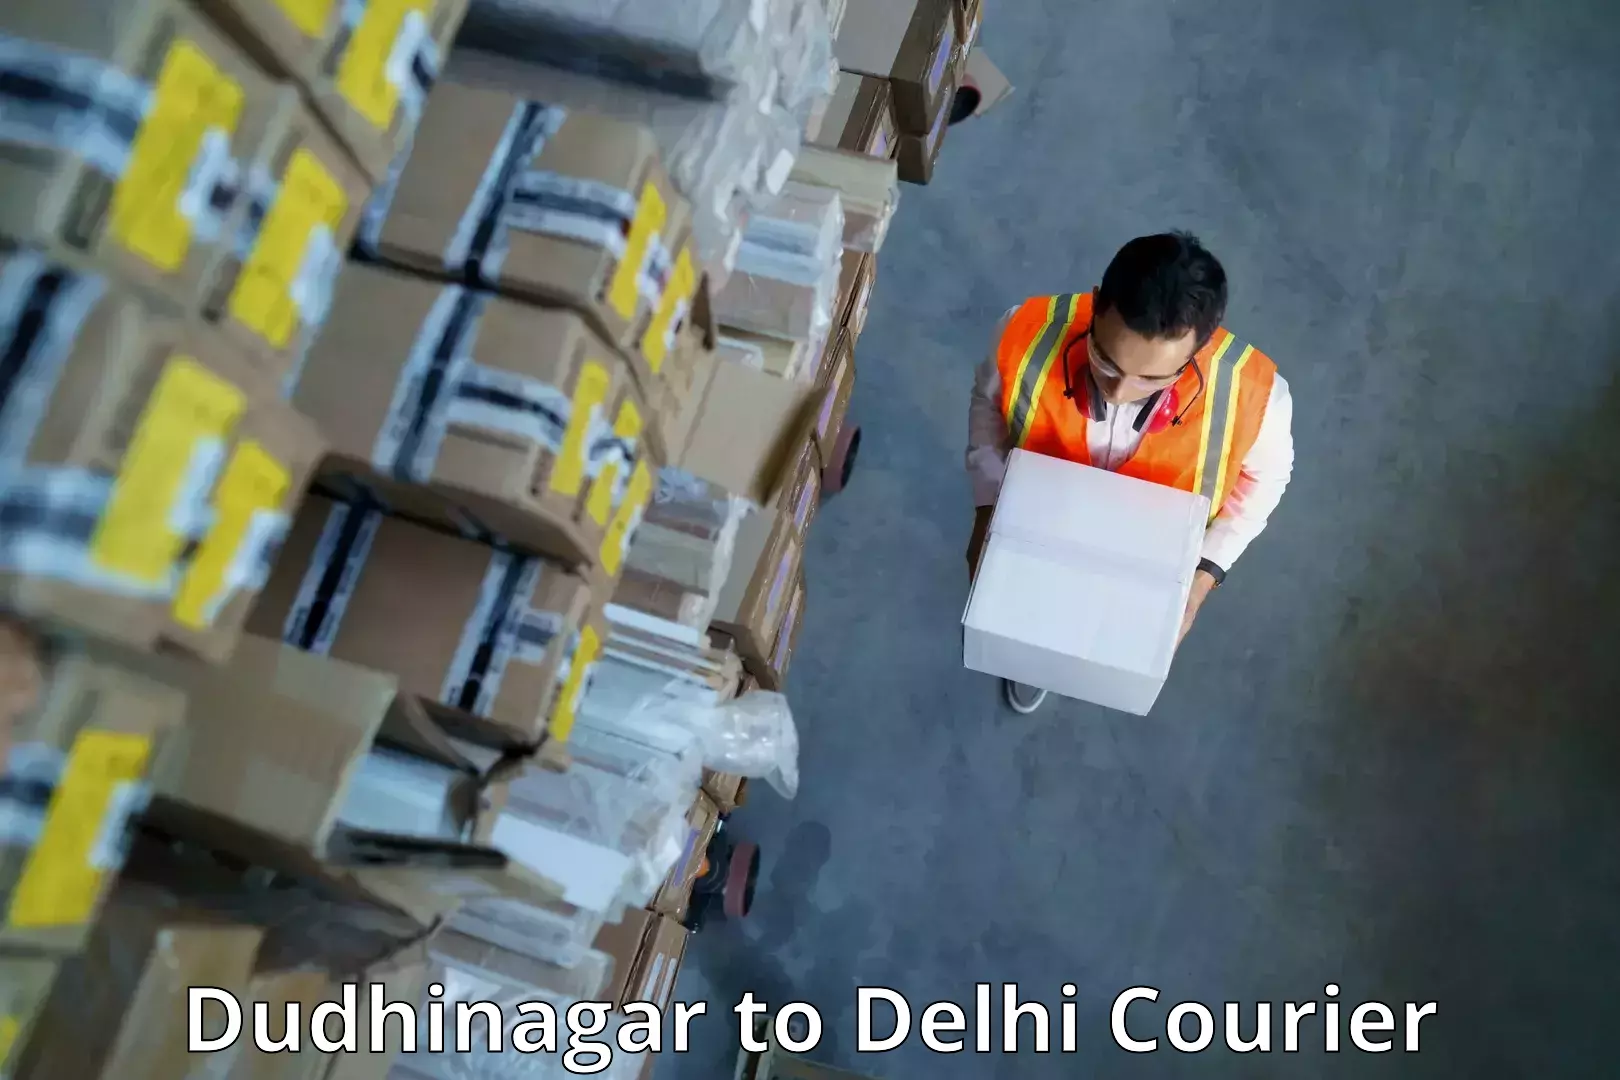 Scheduled delivery in Dudhinagar to NCR